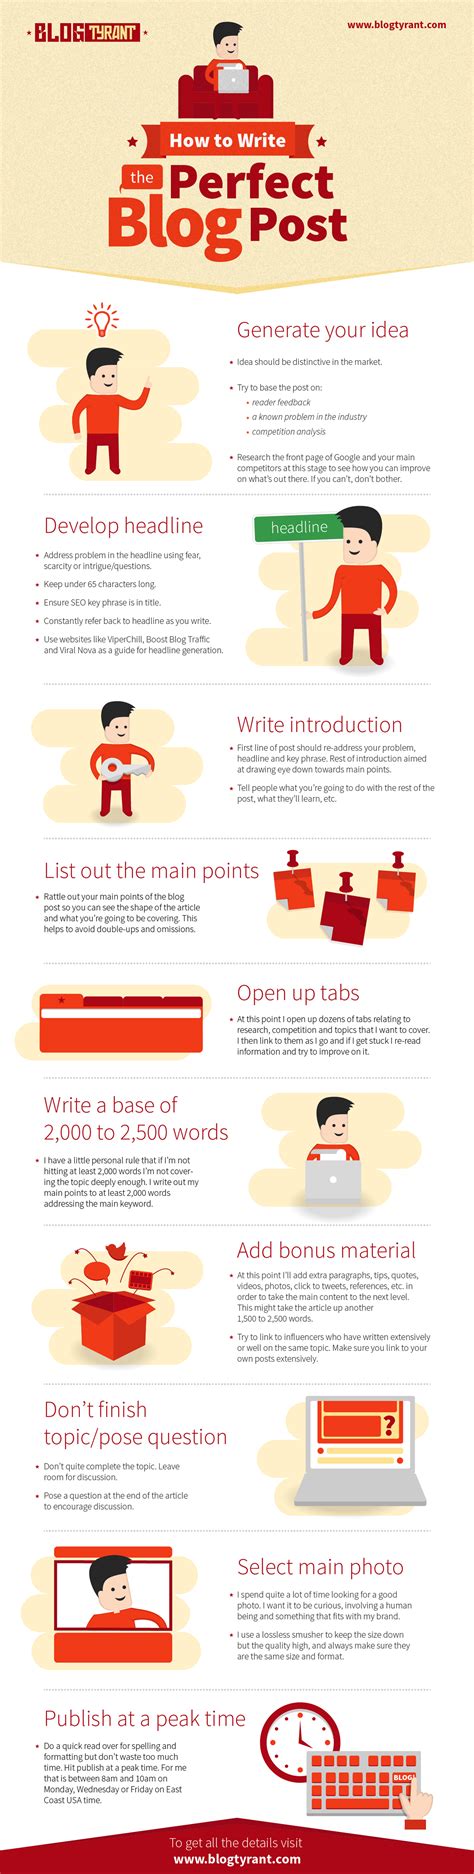 7 Awesome Tips For Writing Brilliant Blog Posts Infographic